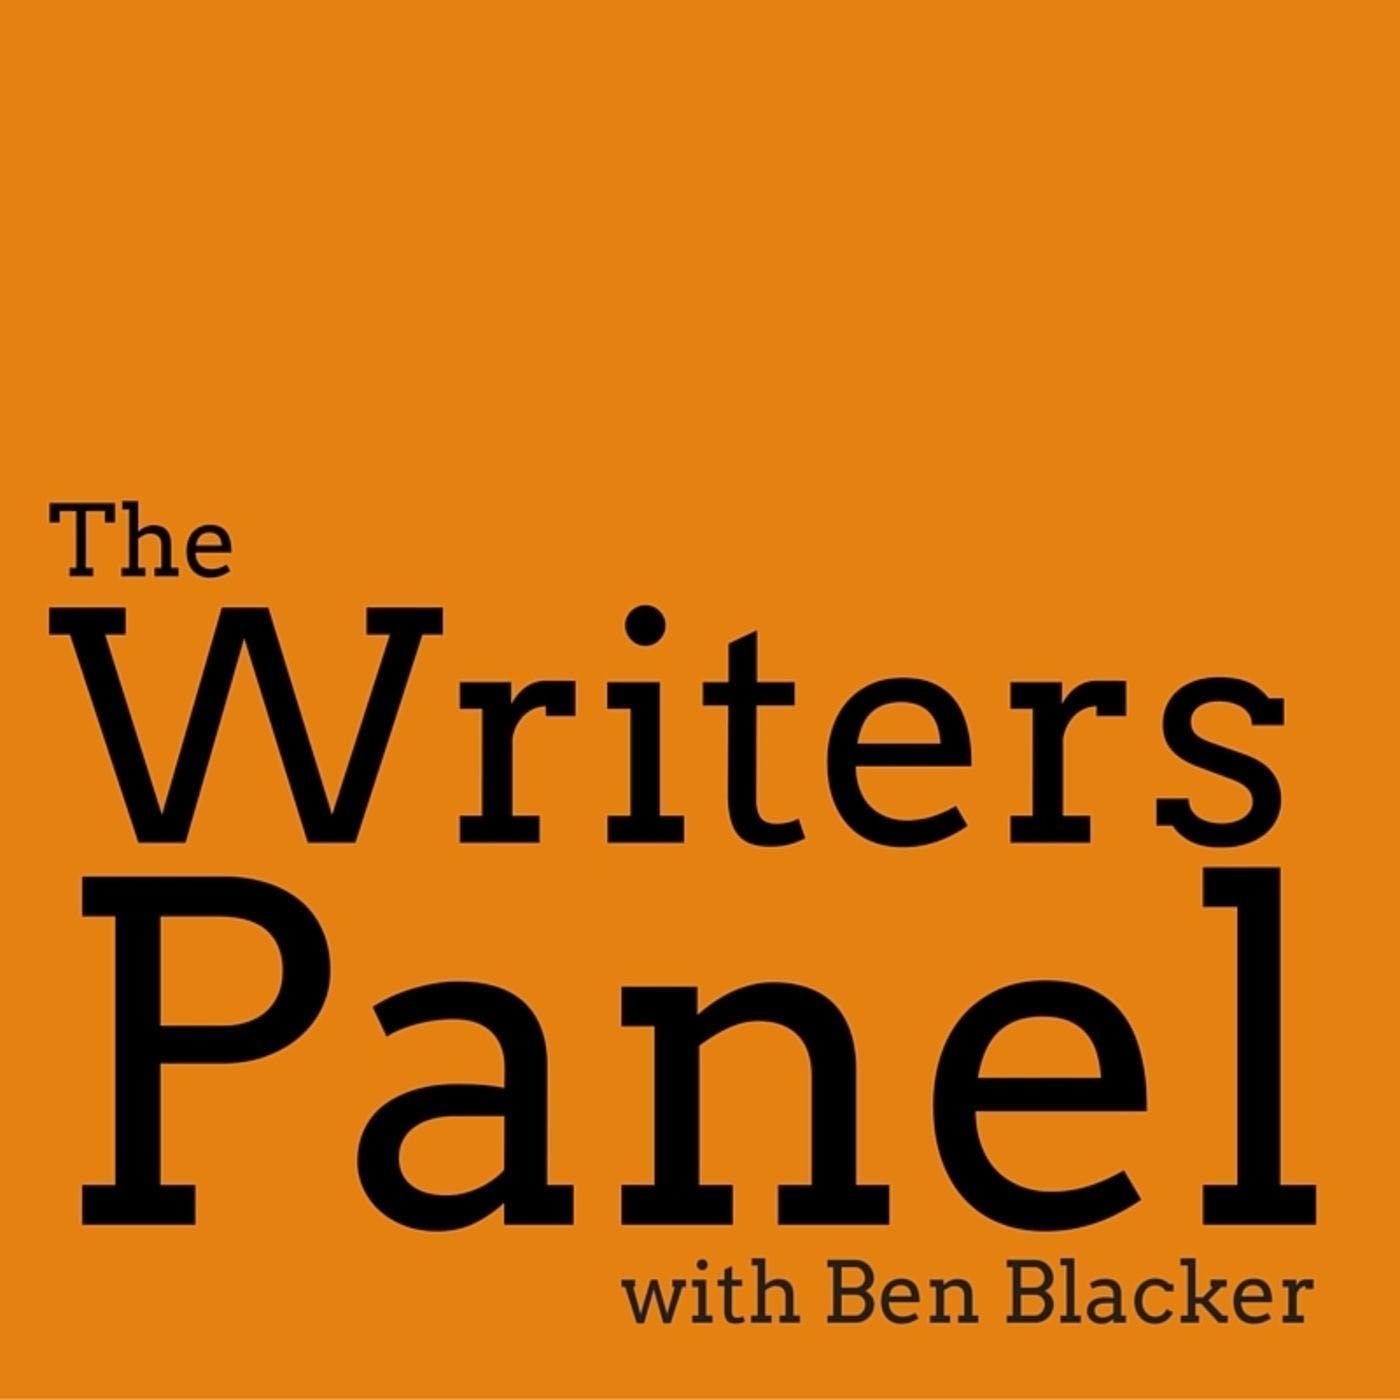 “Writing for TV: From First Draft to Getting Staffed” from Wondercon